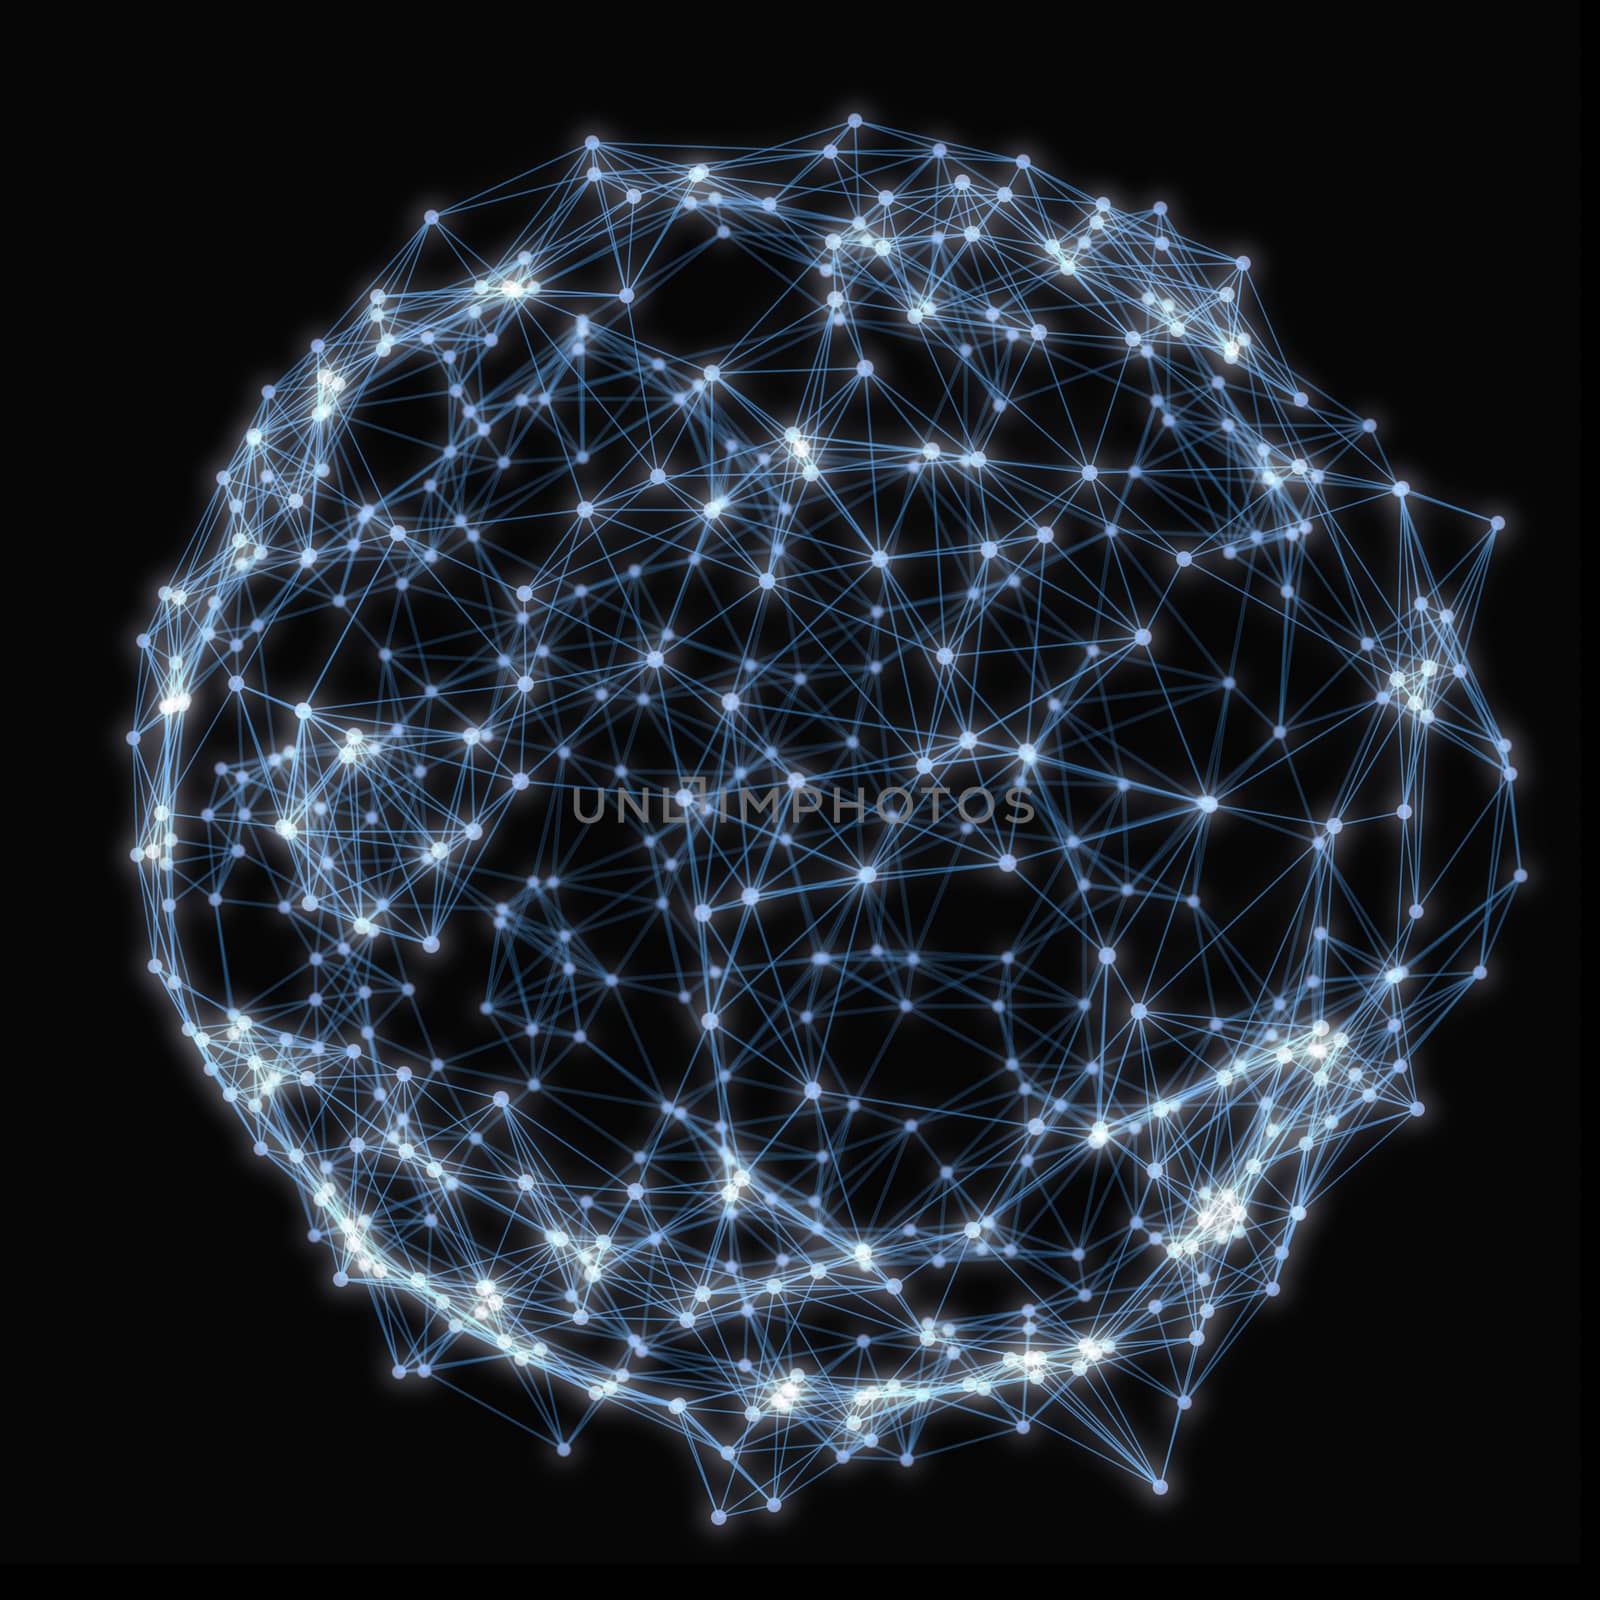 Illuminated distorted sphere of glowing particles and wireframe. 3D Illustration